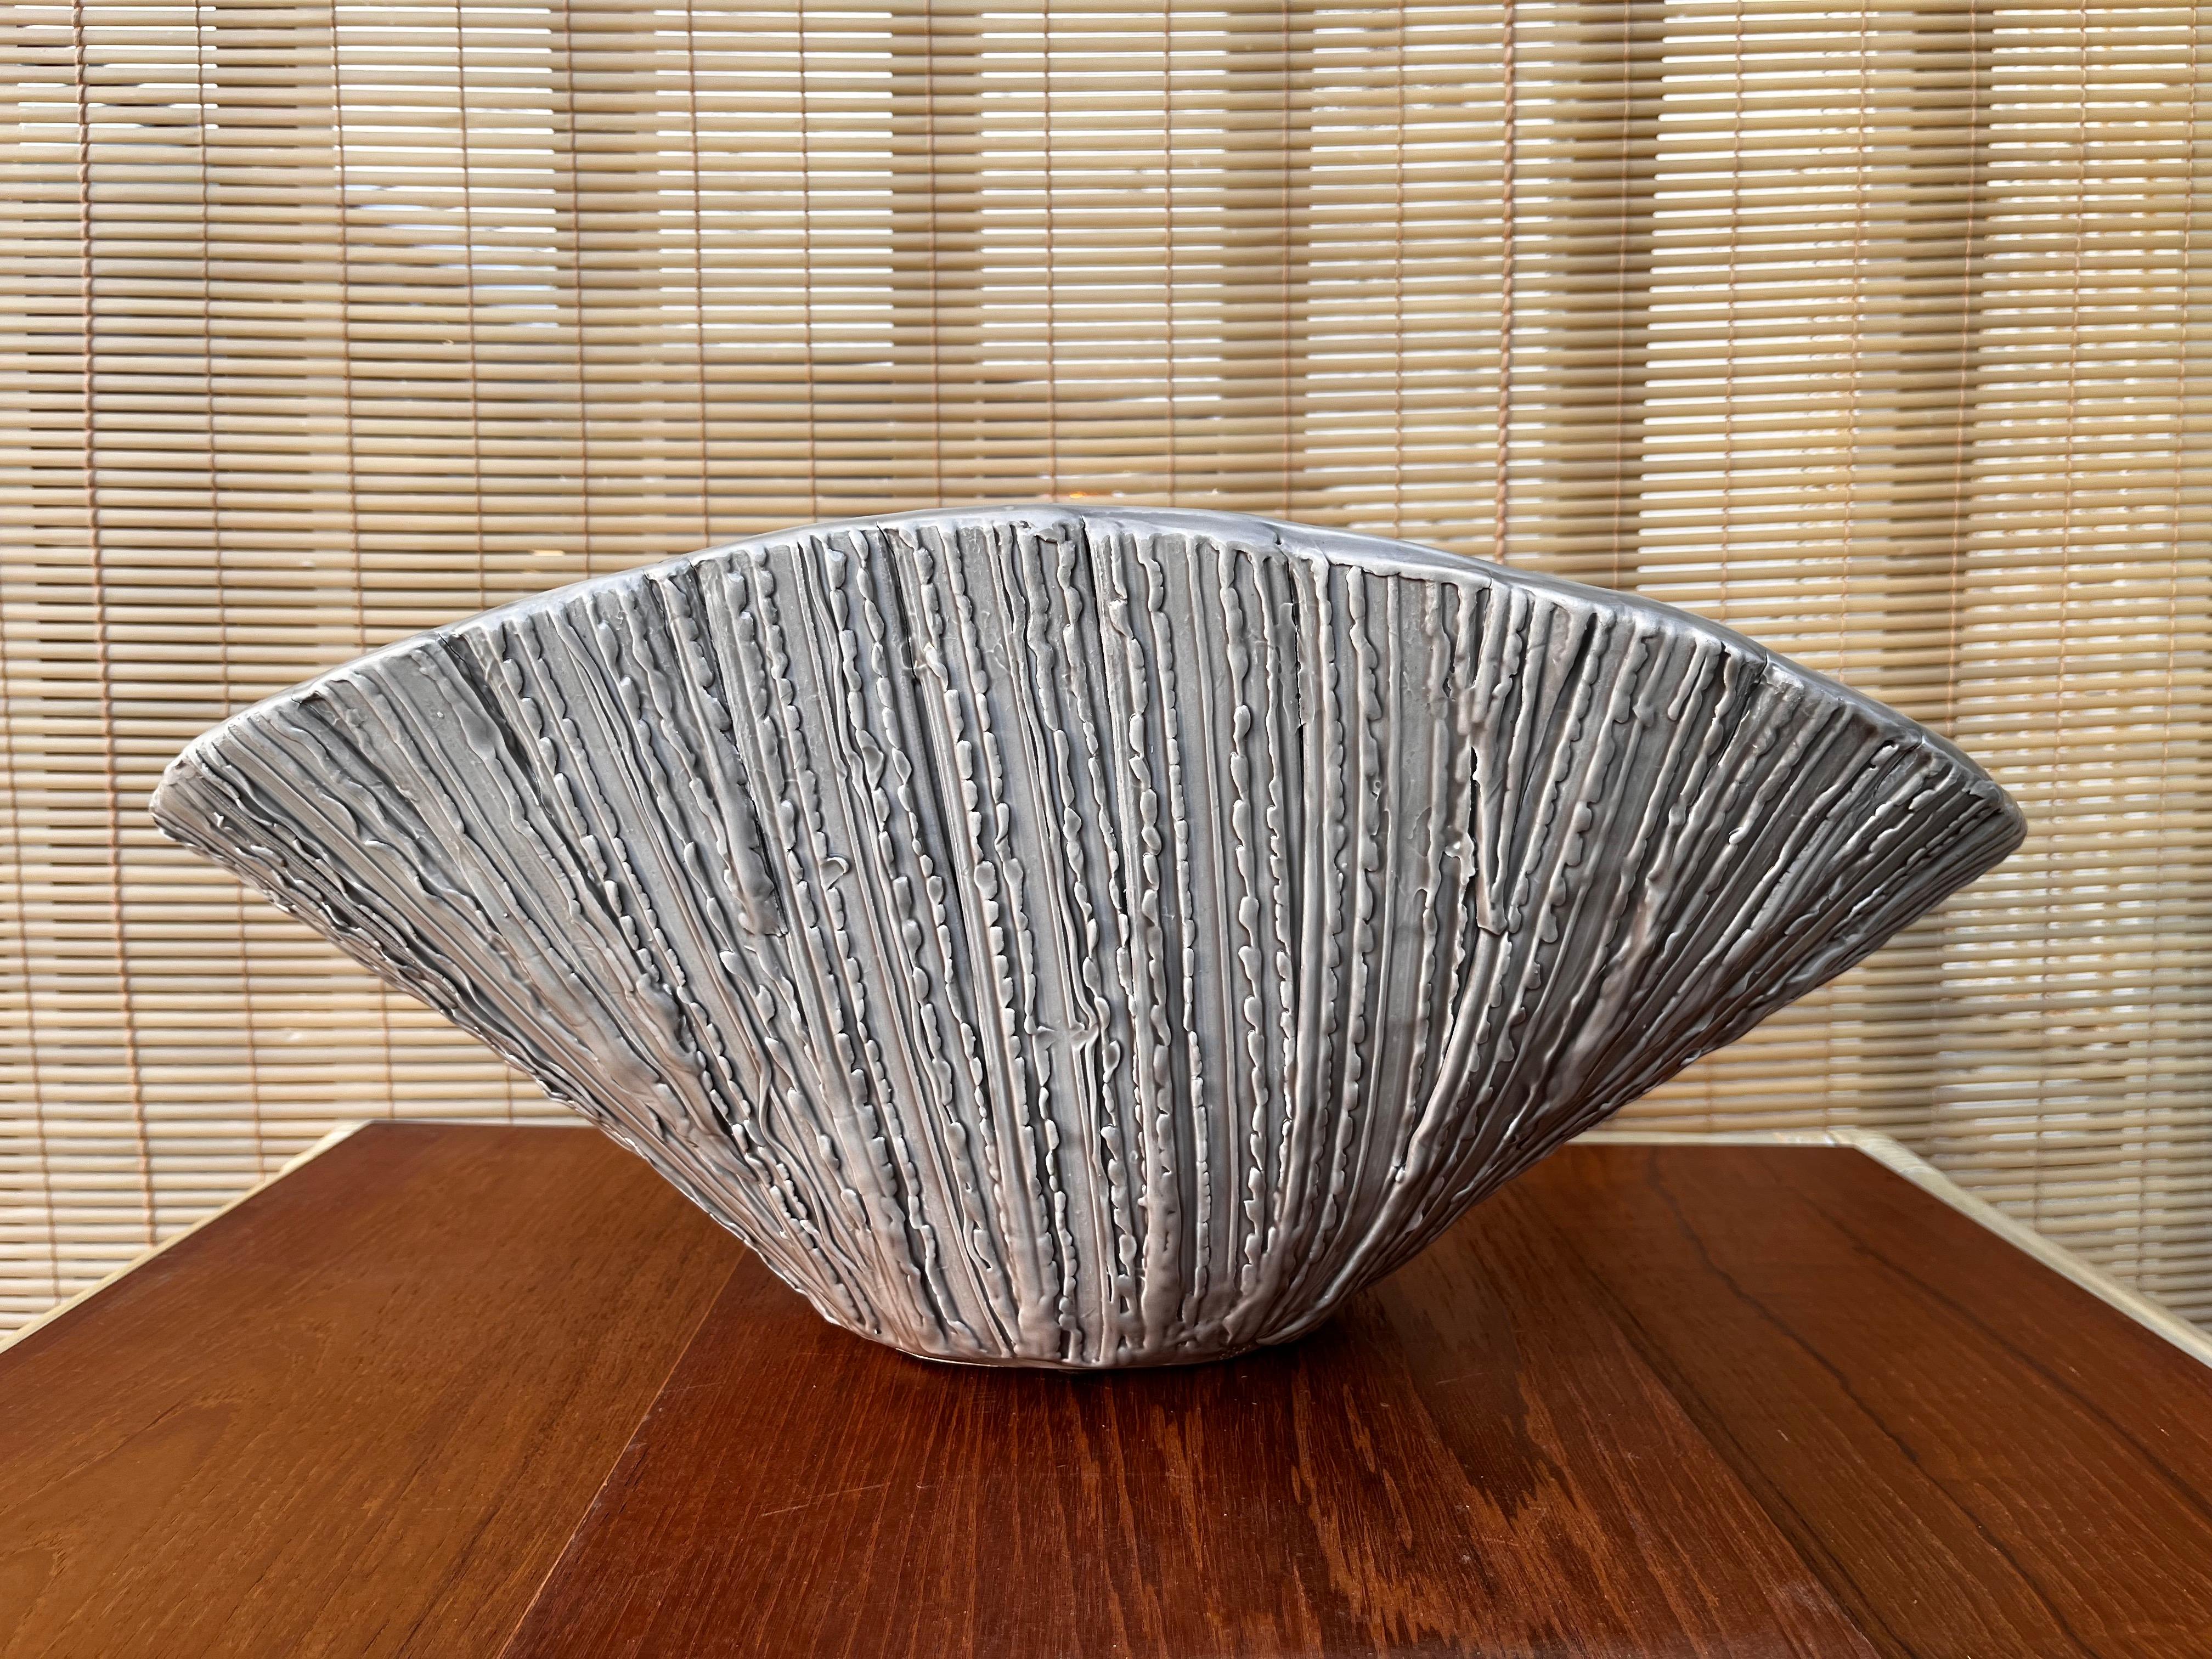 Modern Large Early 21st Century Textured Ceramic Bowl / Centerpiece by Abigails, Italy For Sale